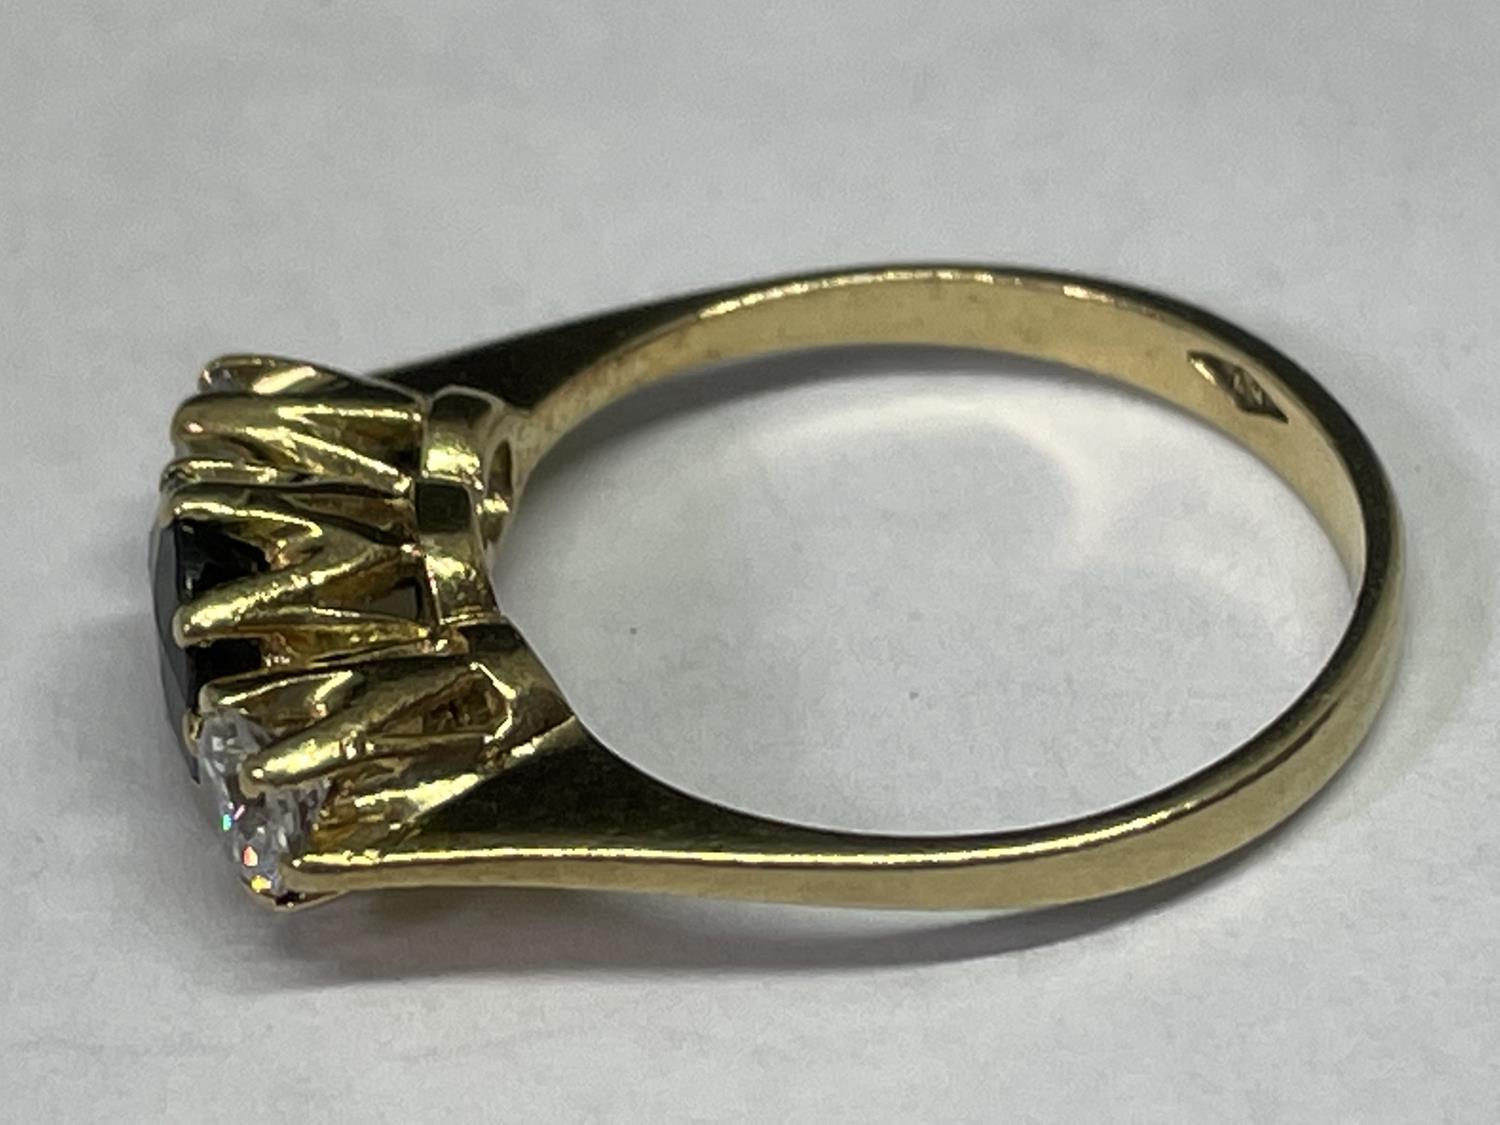 A TESTED TO 9 CARAT GOLD RING WITH CENTRE SAPPHIRE AND A CLEAR STONE EACH SIDE - Image 2 of 3